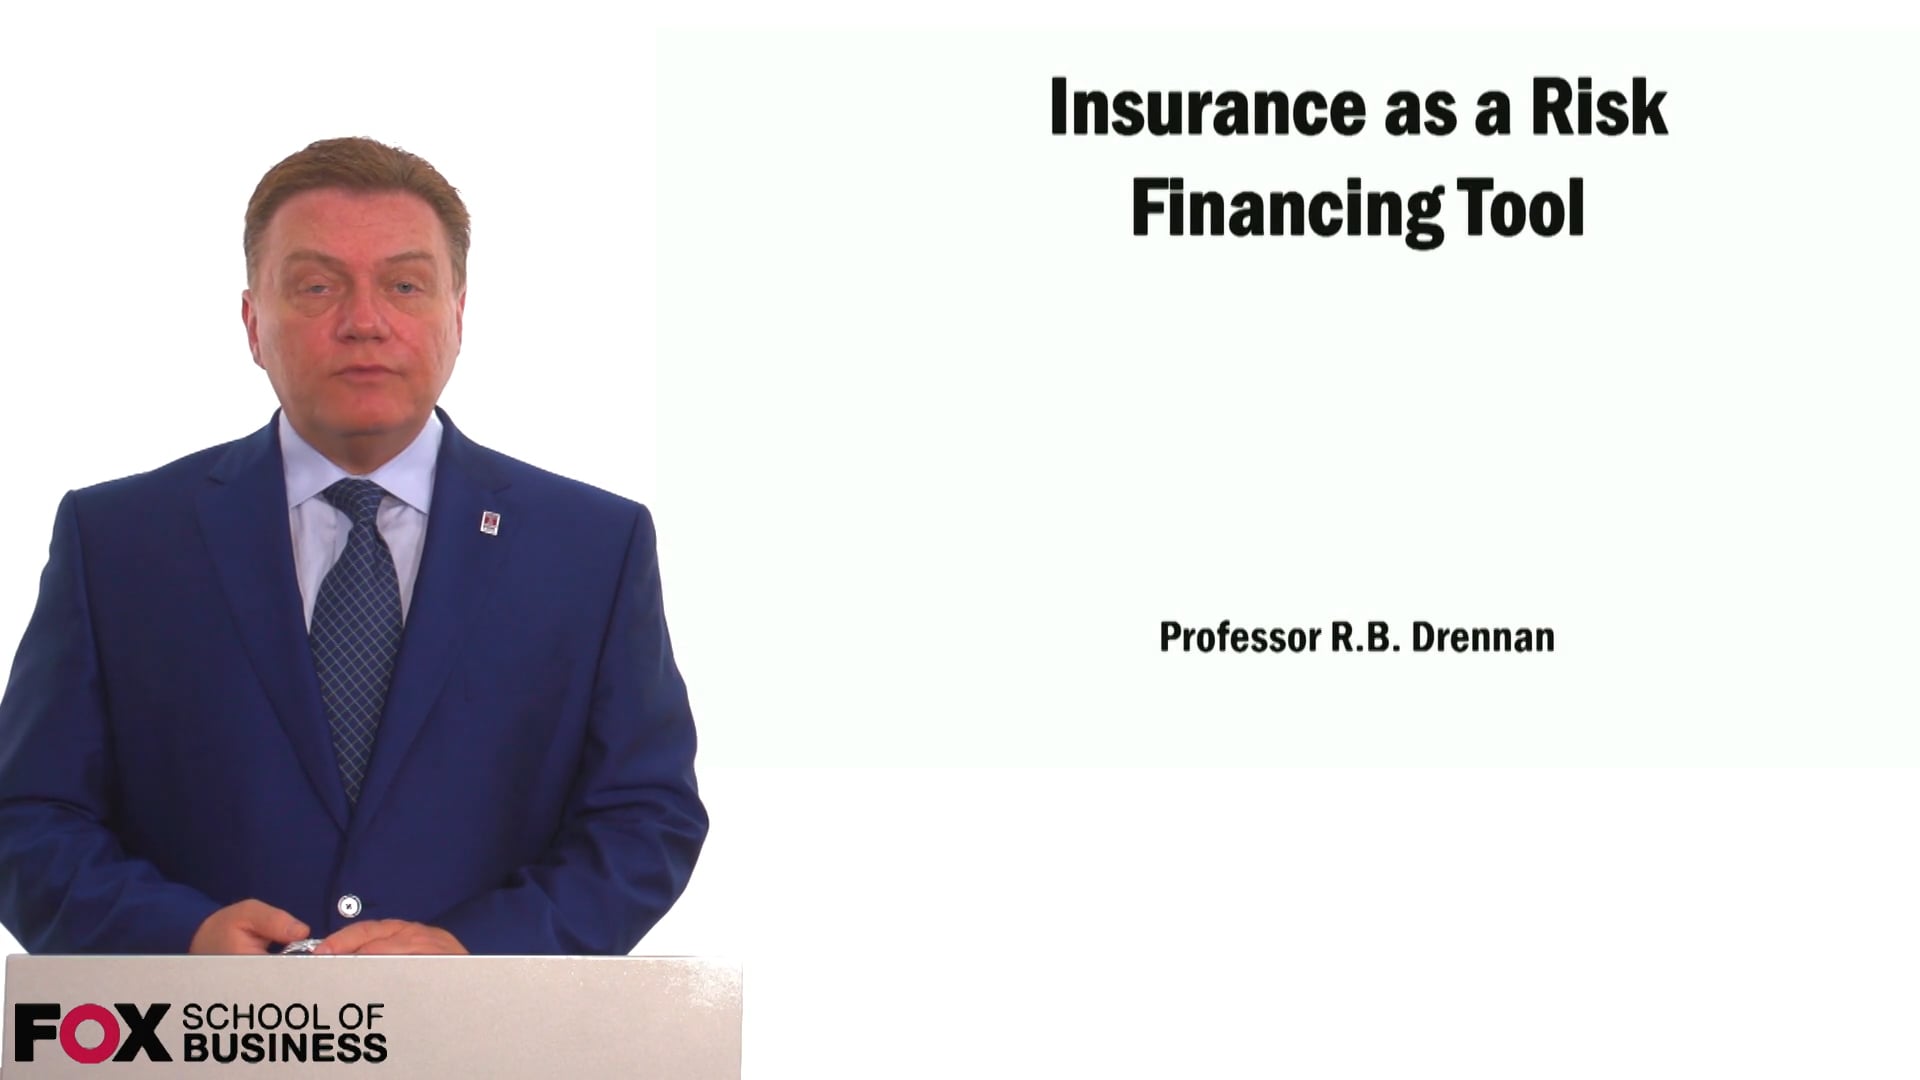 Insurance as a Risk Financing Tool